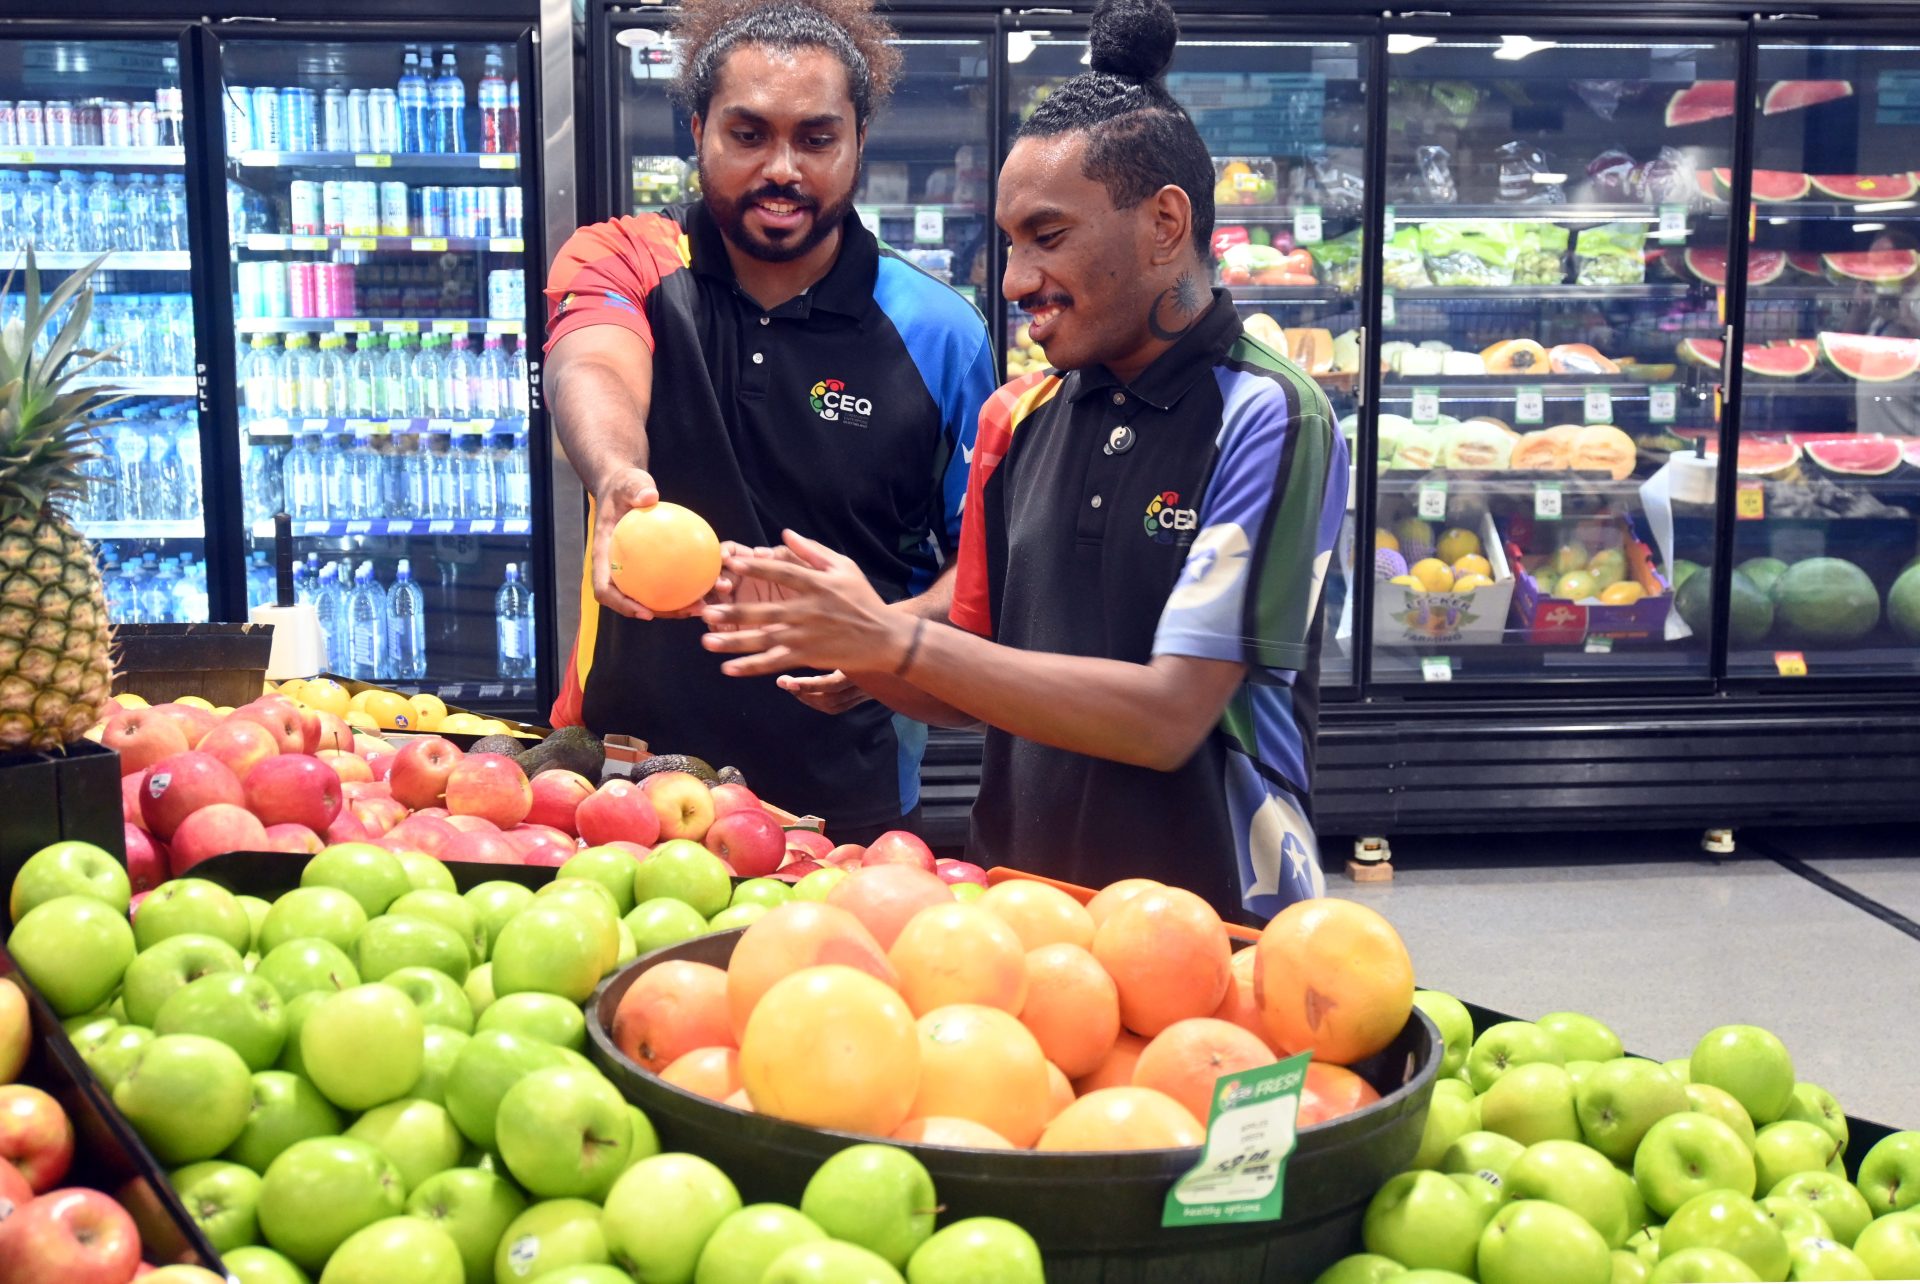 Remote store operator CEQ launches new Nutrition and Wellbeing Strategy to support healthier choices in local Indigenous communities